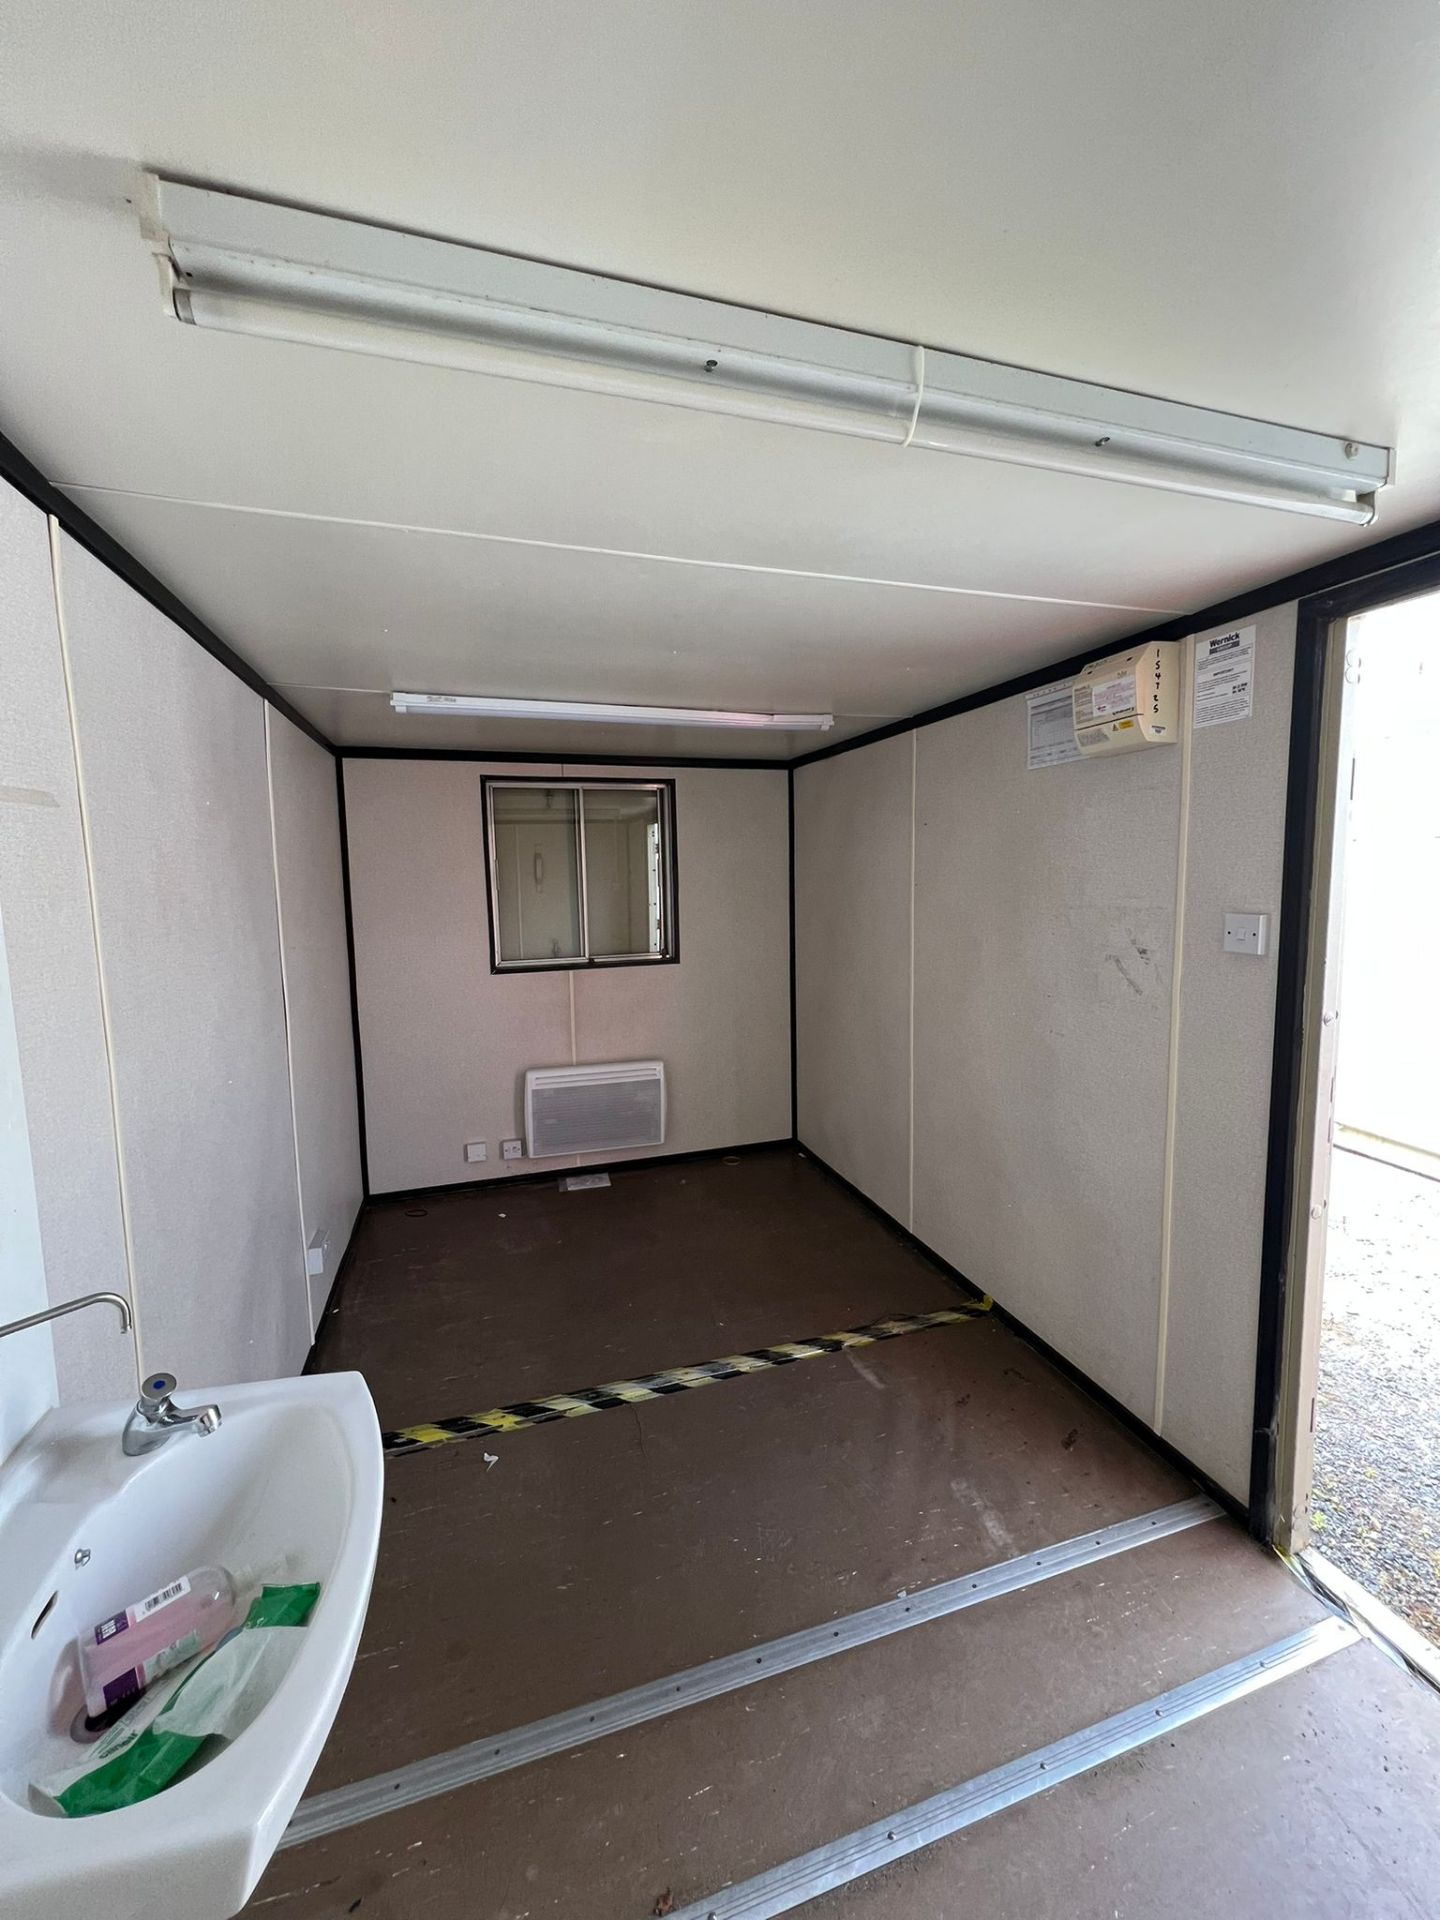 16ft site office - Image 5 of 5